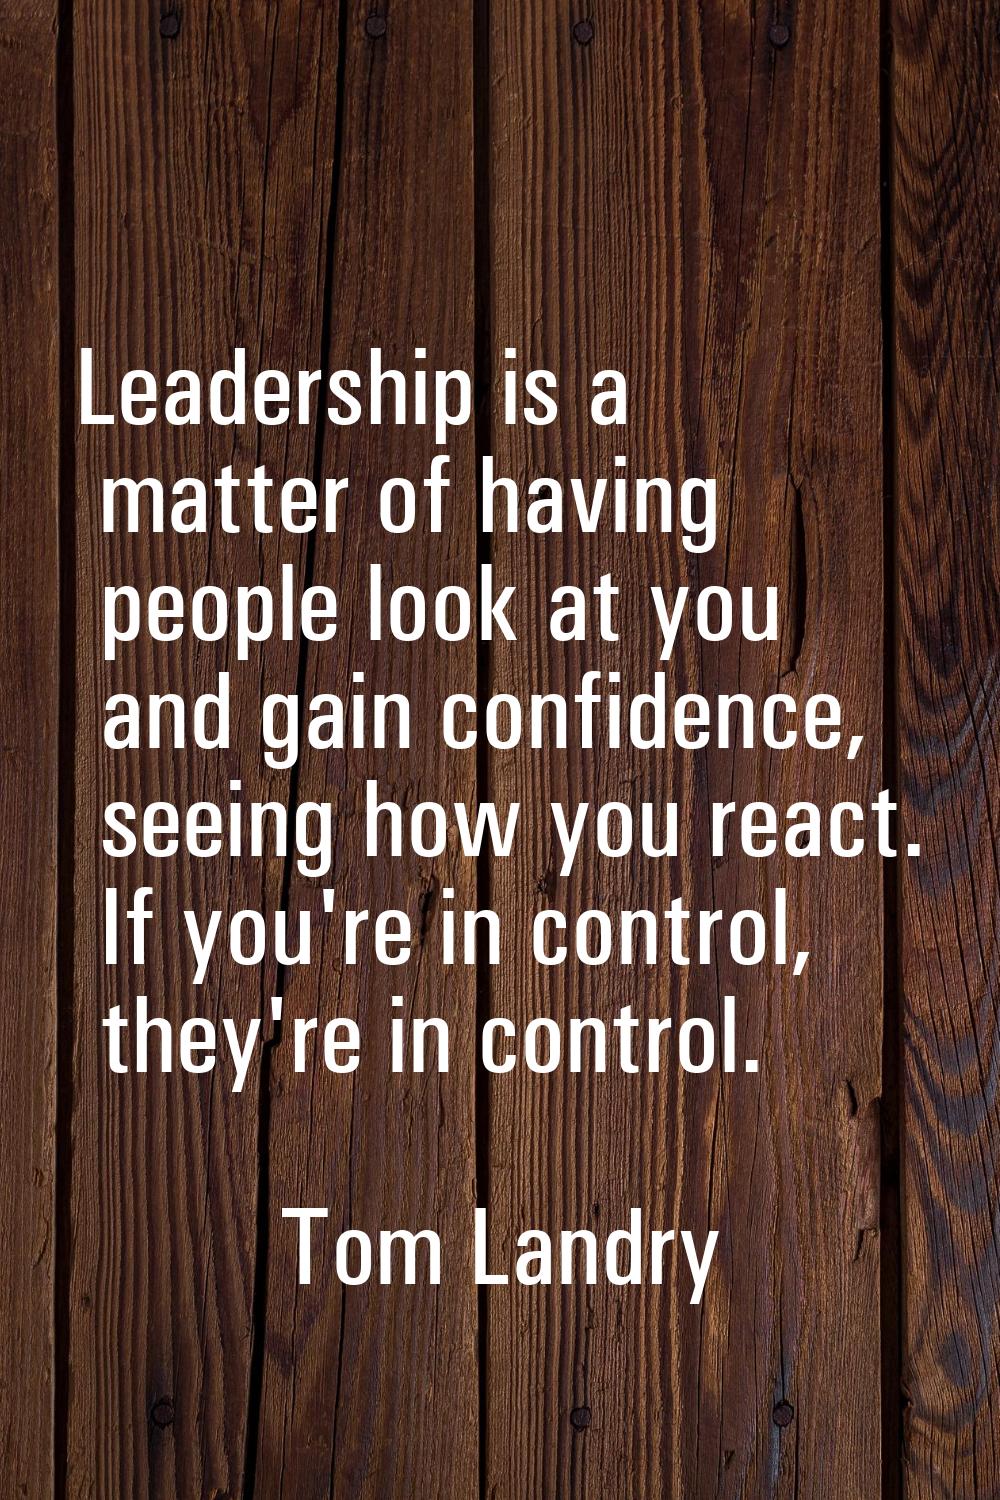 Leadership is a matter of having people look at you and gain confidence, seeing how you react. If y